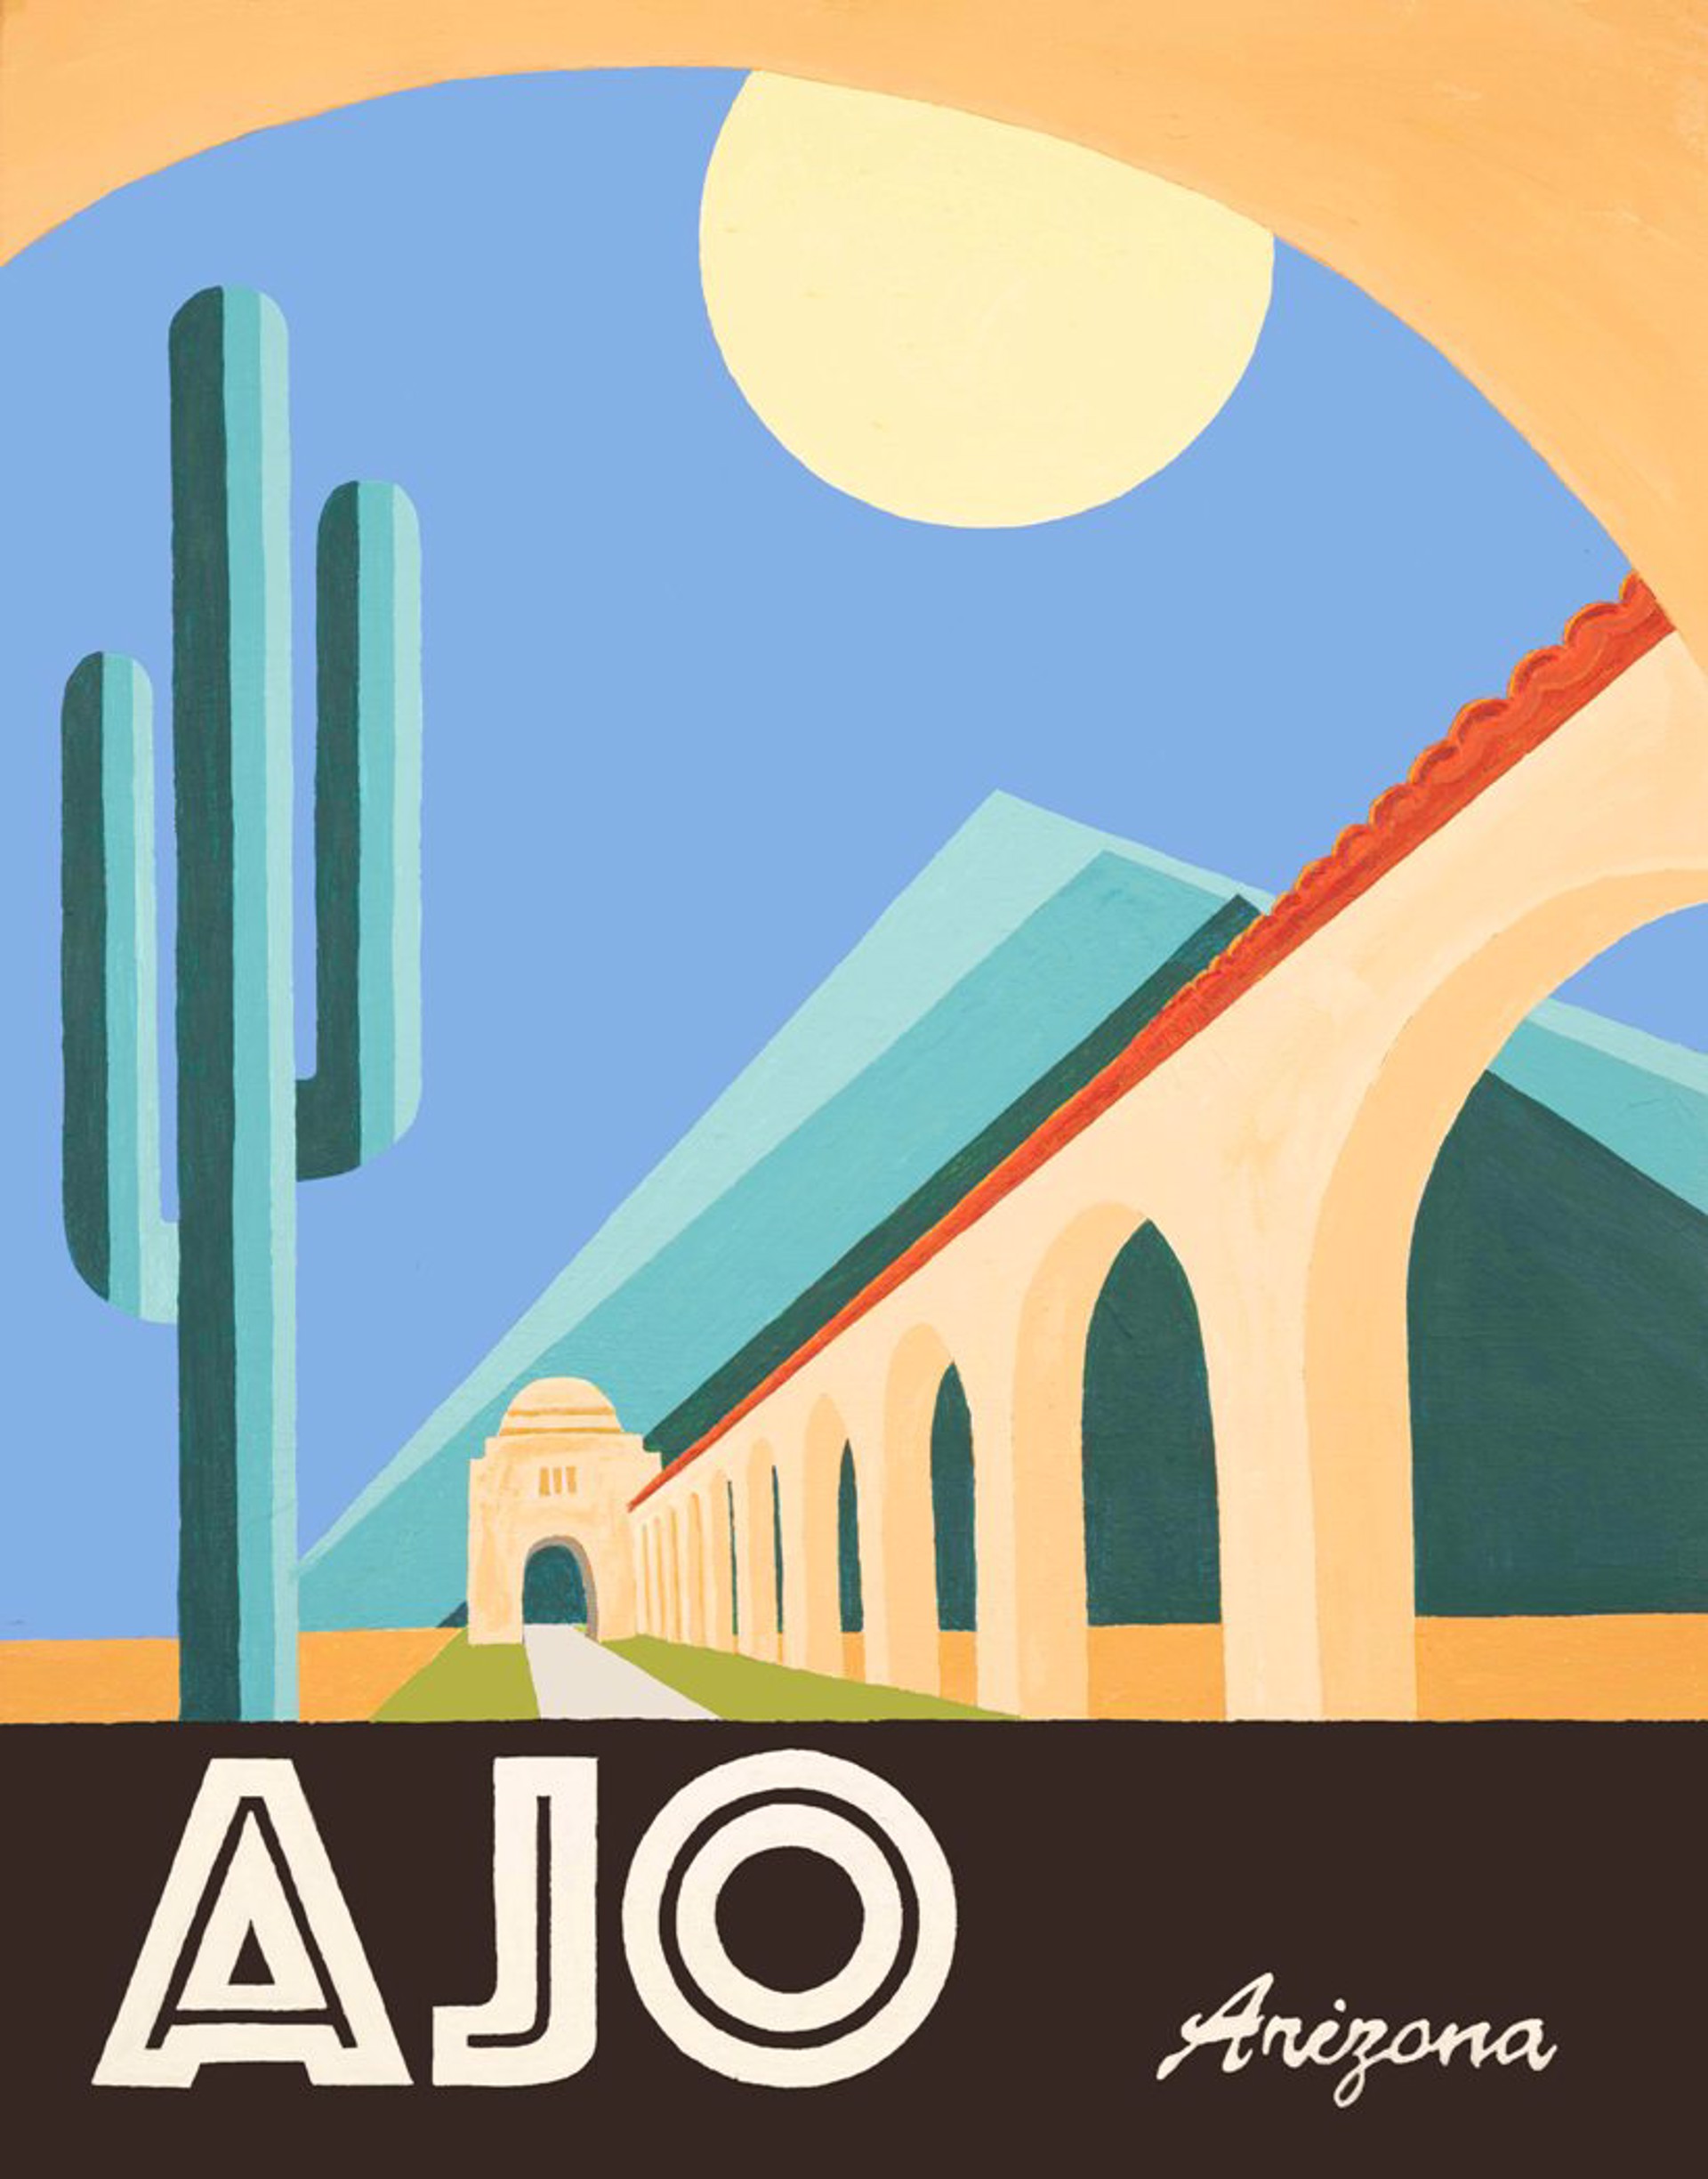 Discover Ajo by John Wulf